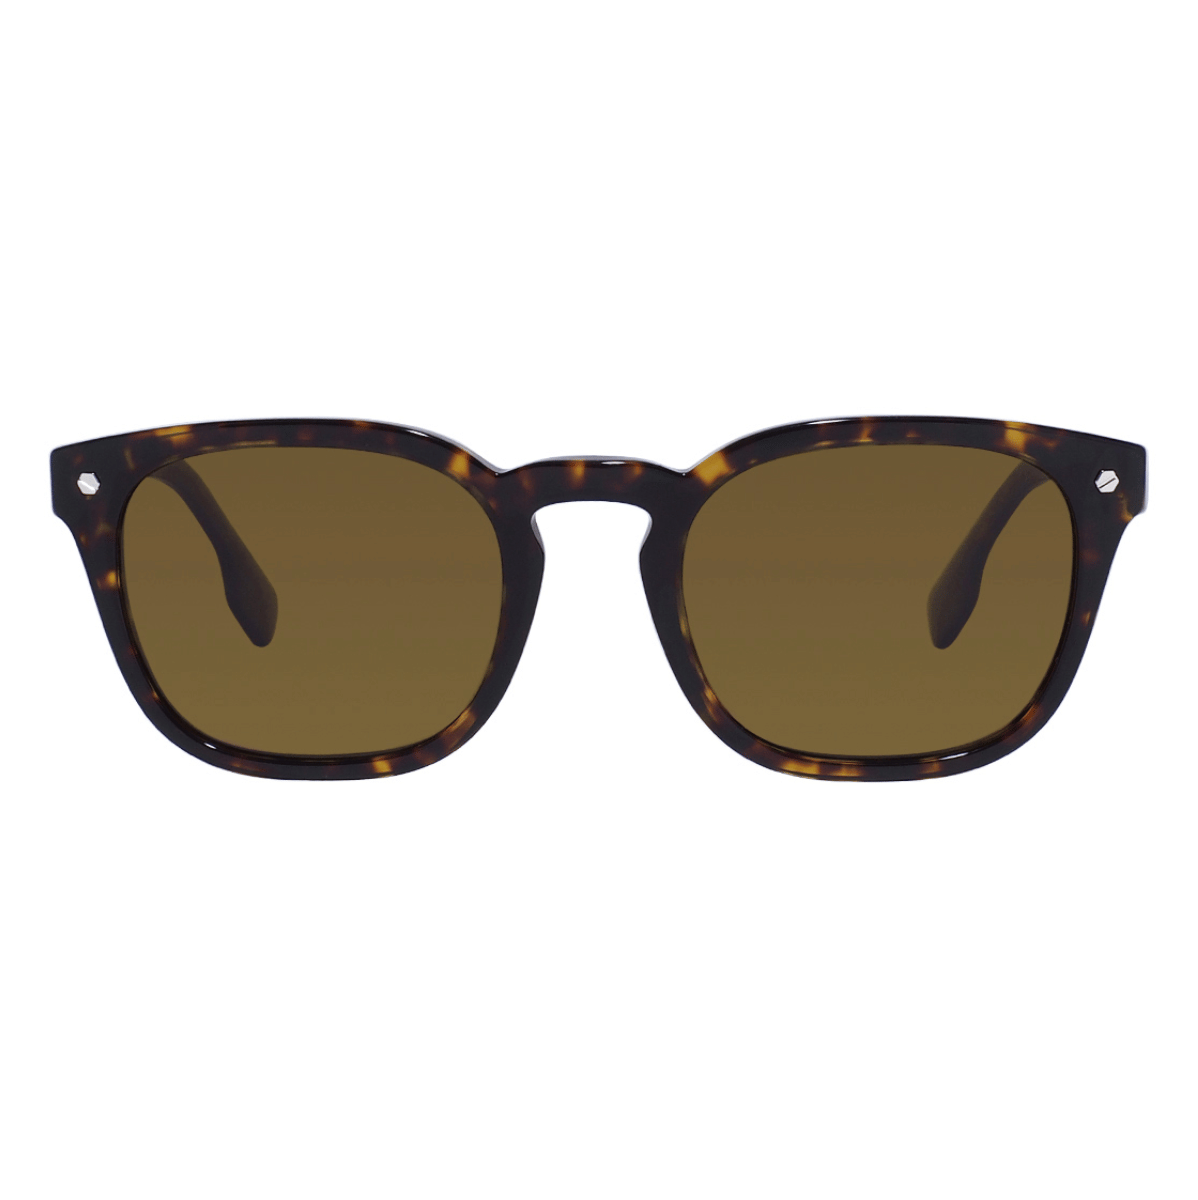 "Get the best Burberry sunglasses for men and women at Optorium: Discover the chic BE4329F model featuring non-polarized lenses and a sleek square shape for timeless elegance."